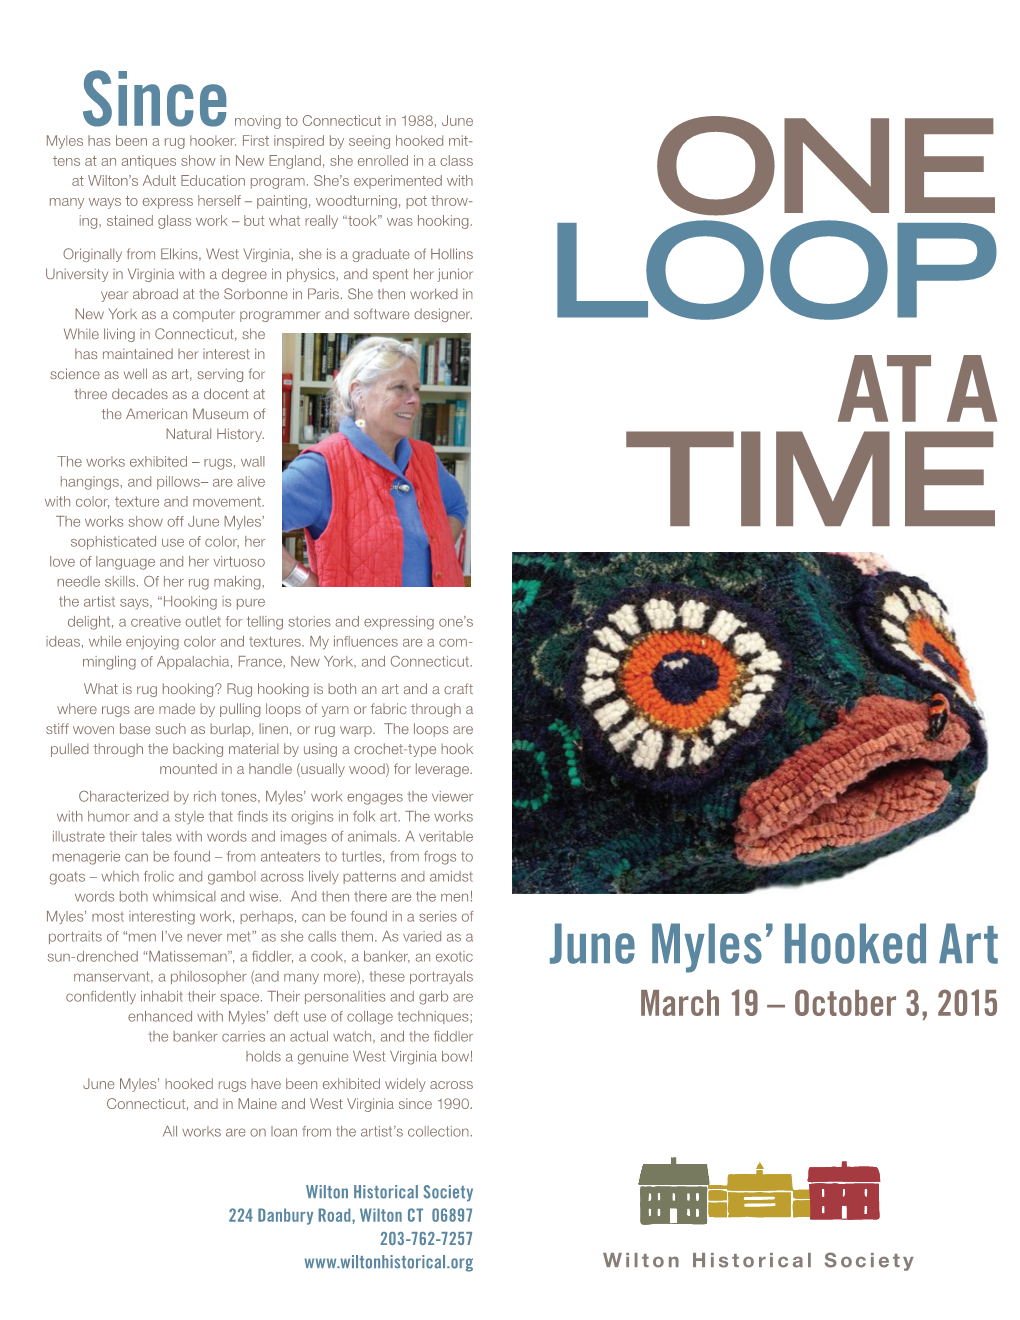 One Loop at a Time: June Myles' Hooked